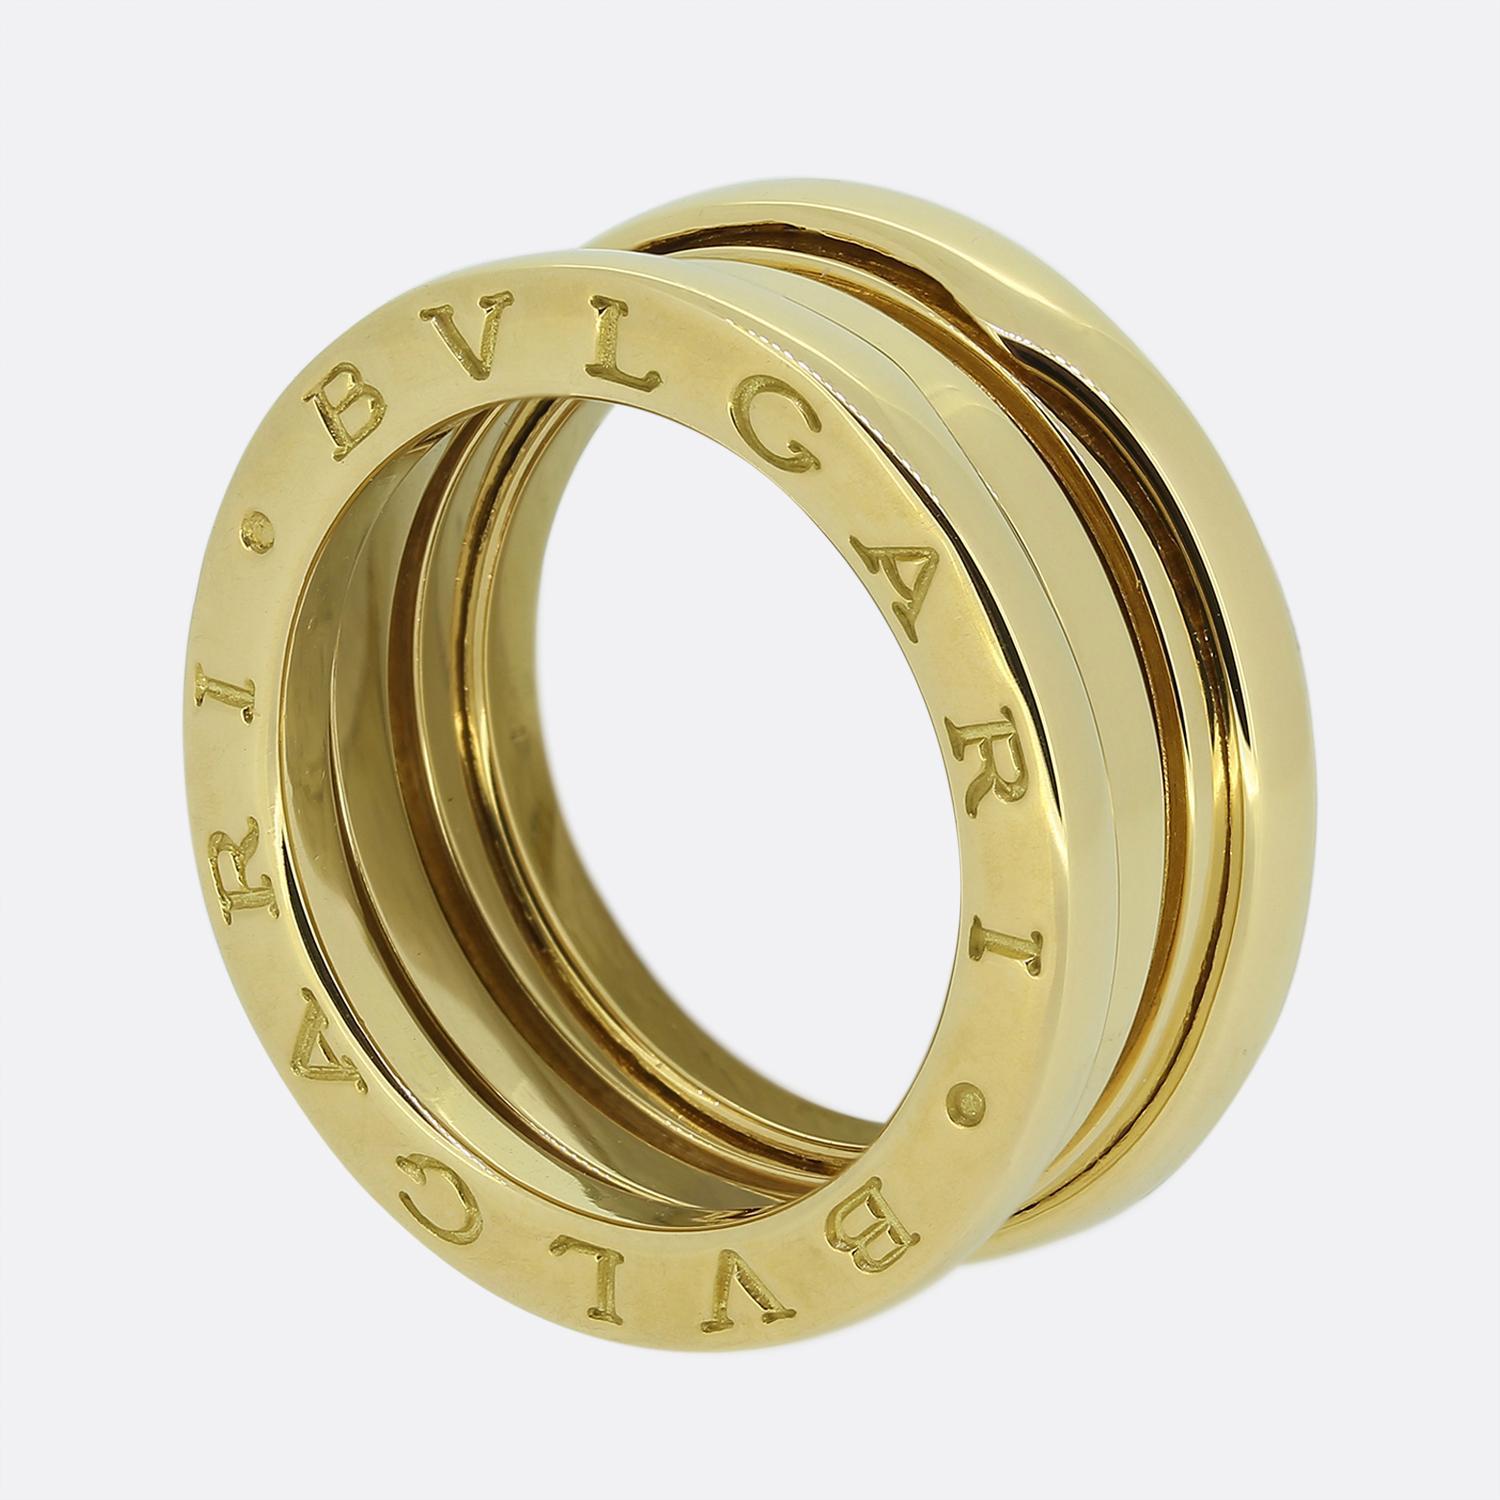 Here we have an excellently crafted B.Zero1 ring from the world renowned Italian jewellery house of Bvlagri. This is the 18ct yellow gold three-band model. 

The B.zero1 collection is inspired by the Roman colosseum, the most eternal of all